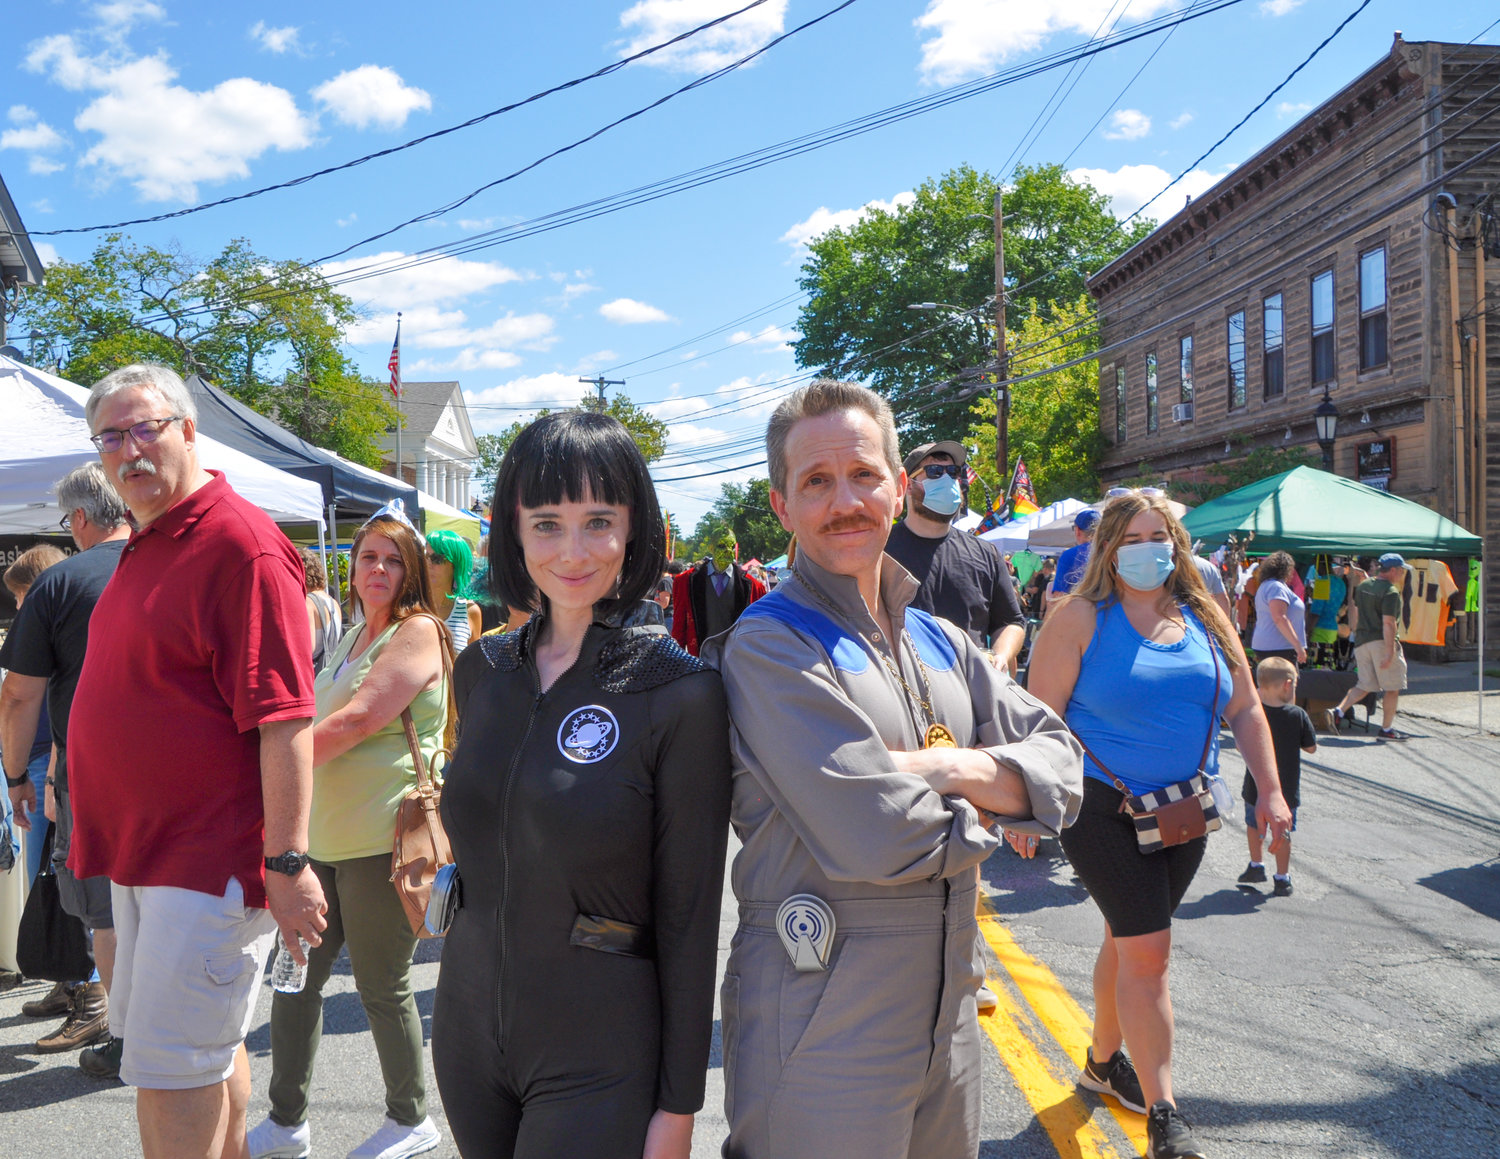 Galaxy Quest cosplayers, playing characters Laliari and Guy Fleegman, were "on point" at the Pine Bush UFO Fair a couple of weeks ago. I stopped, took their picture, and immediately went on vacation.